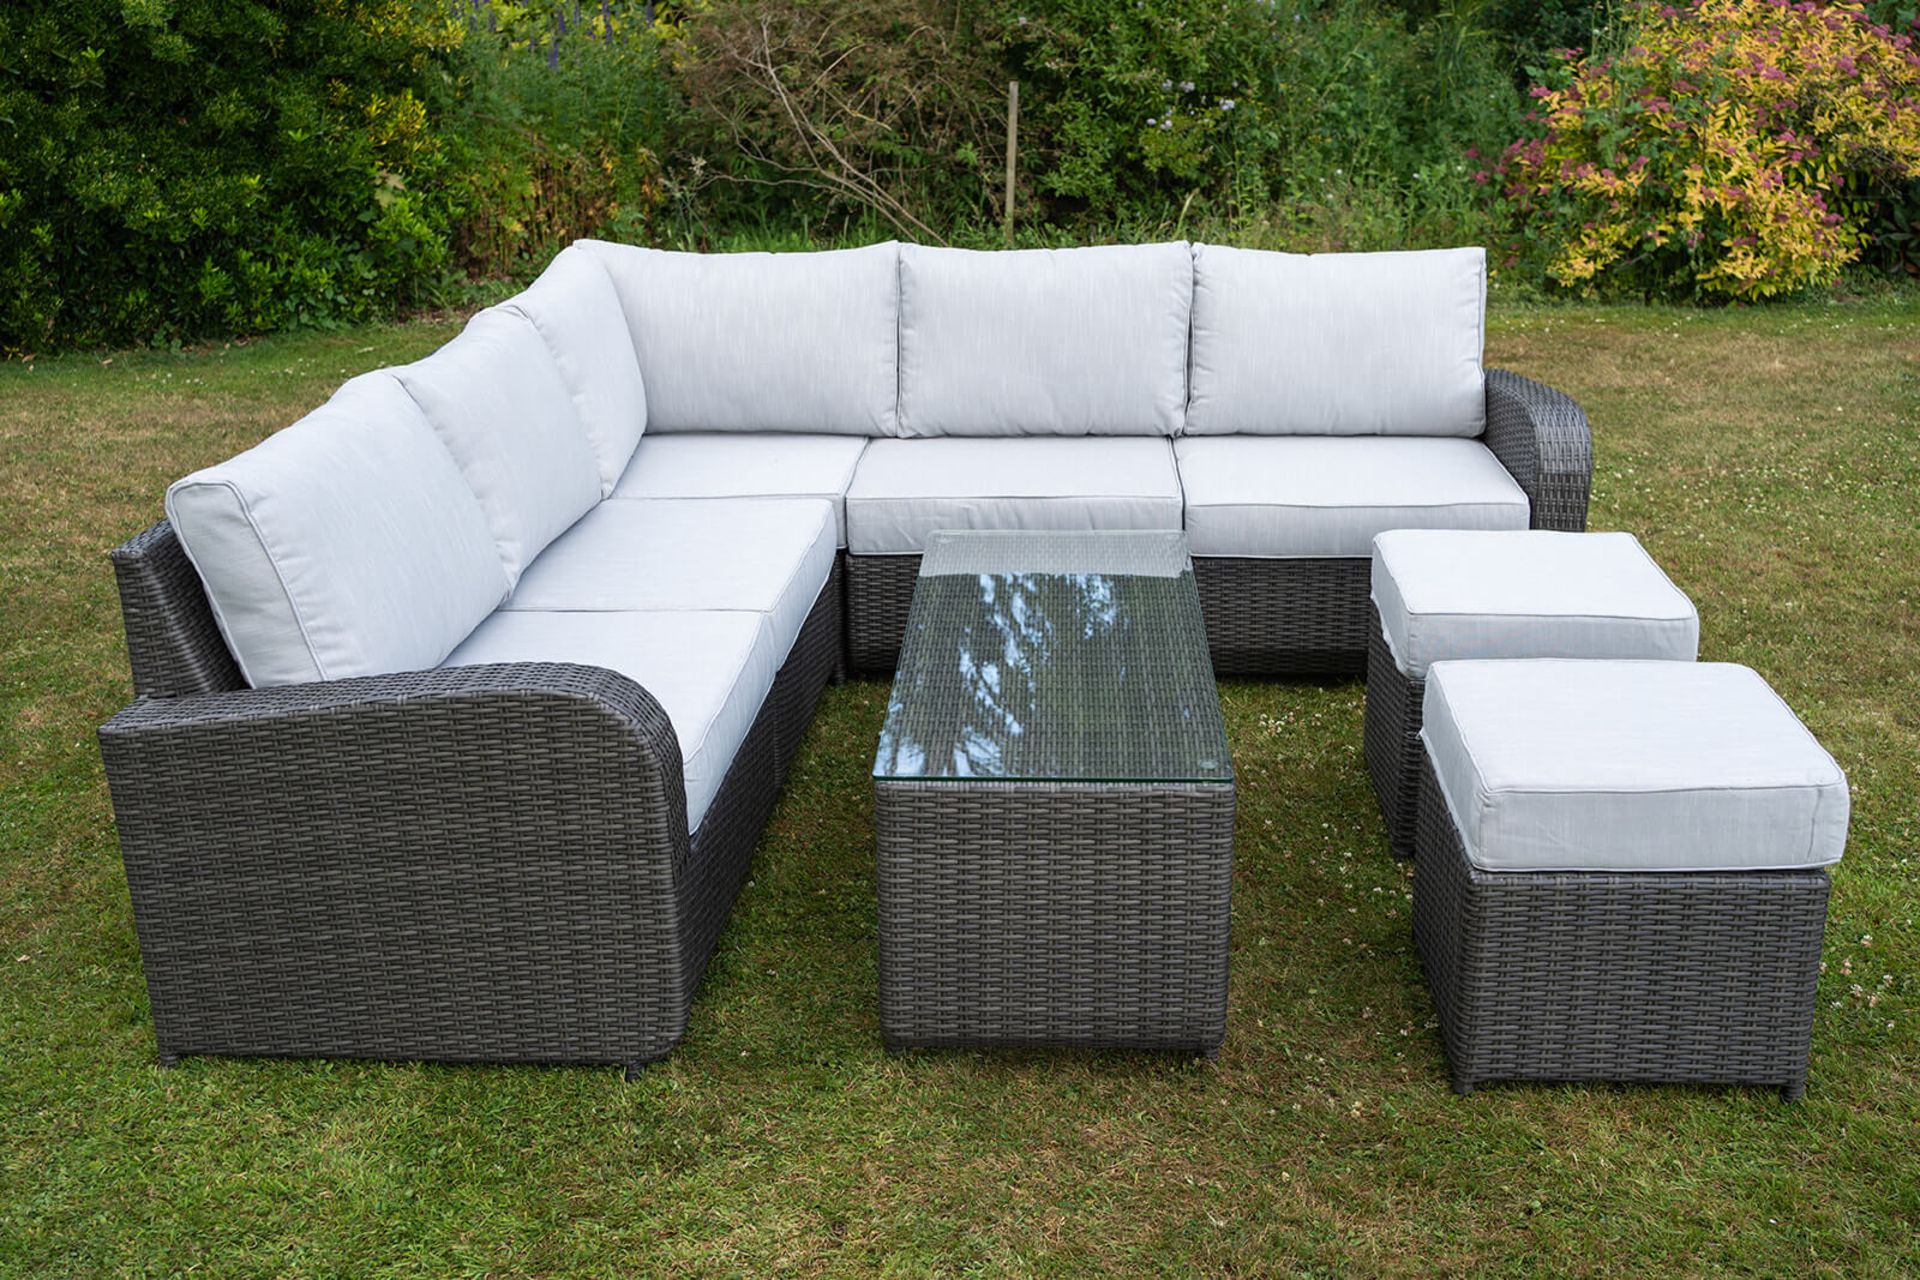 Brand New Moda Furniture 8 Piece Corner Group With Coffee Table in Natural with Cream Cushions. RRP - Image 2 of 11